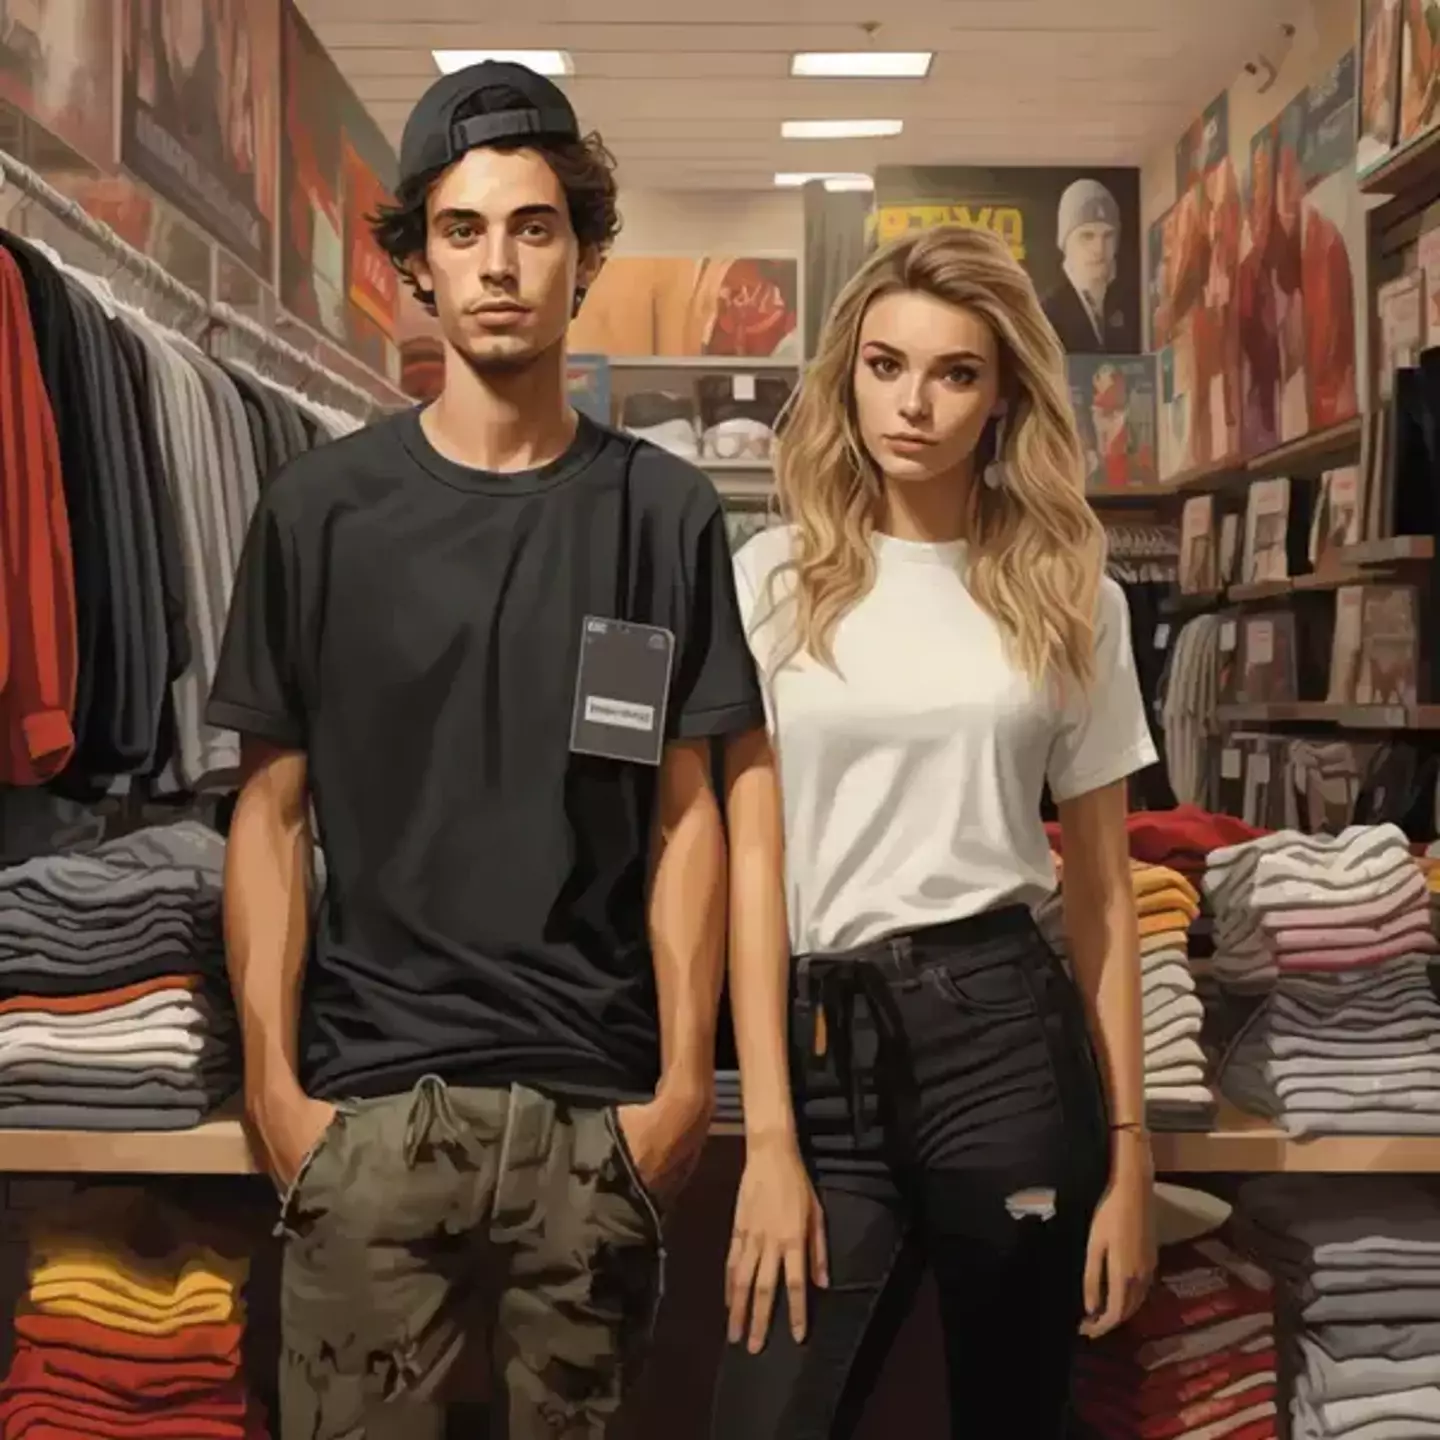 Ooo, so cool, so edgy. These retail workers definitely work in Urban Outfitters.